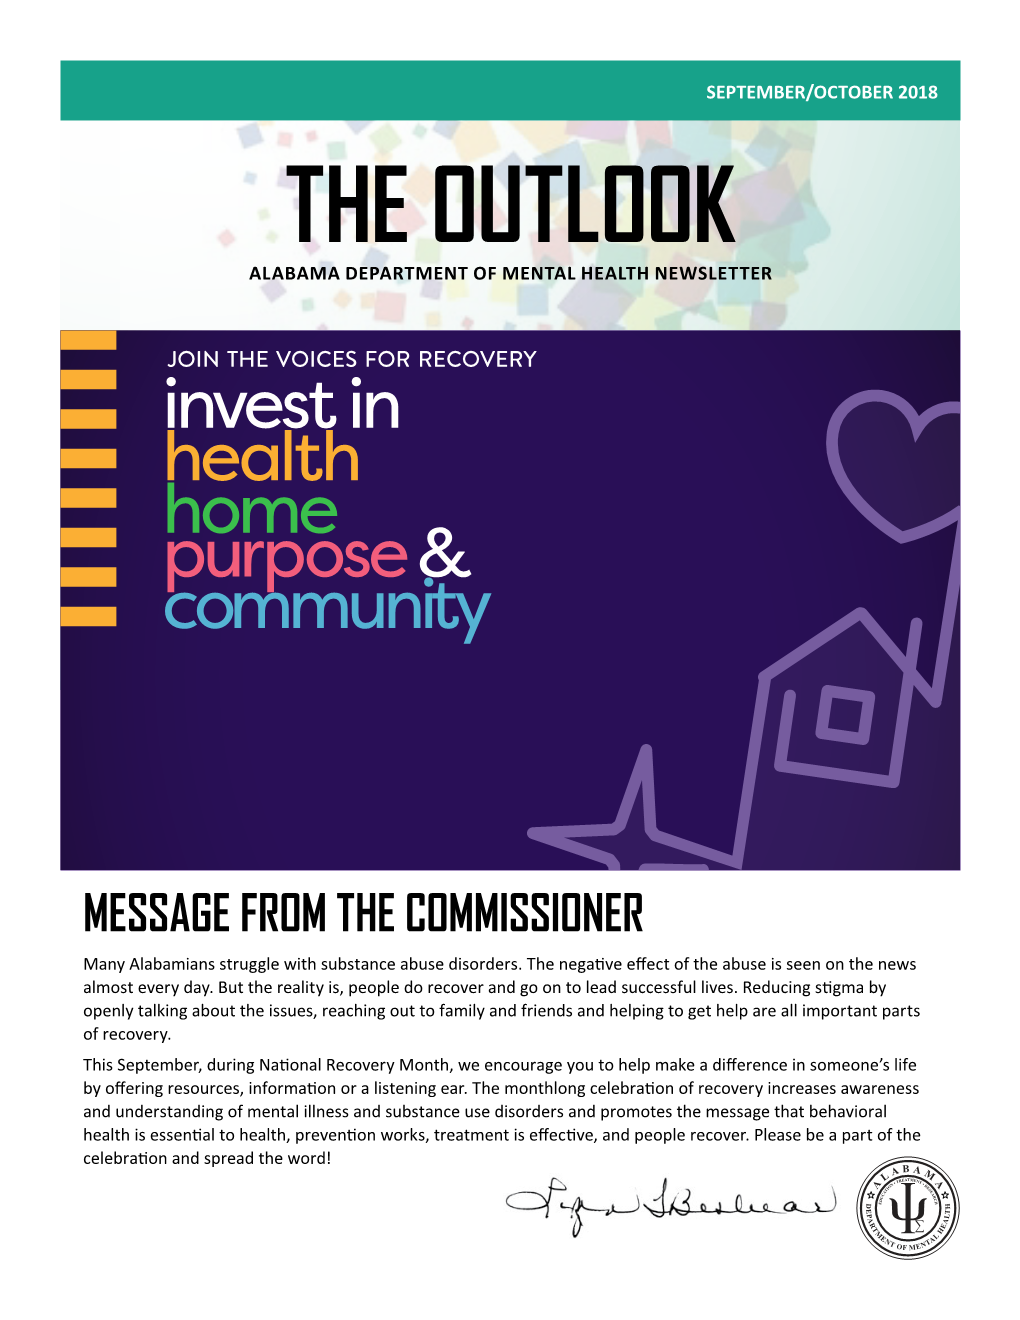 THE OUTLOOK Alabama DEPARTMENT of Mental Health Newsletter